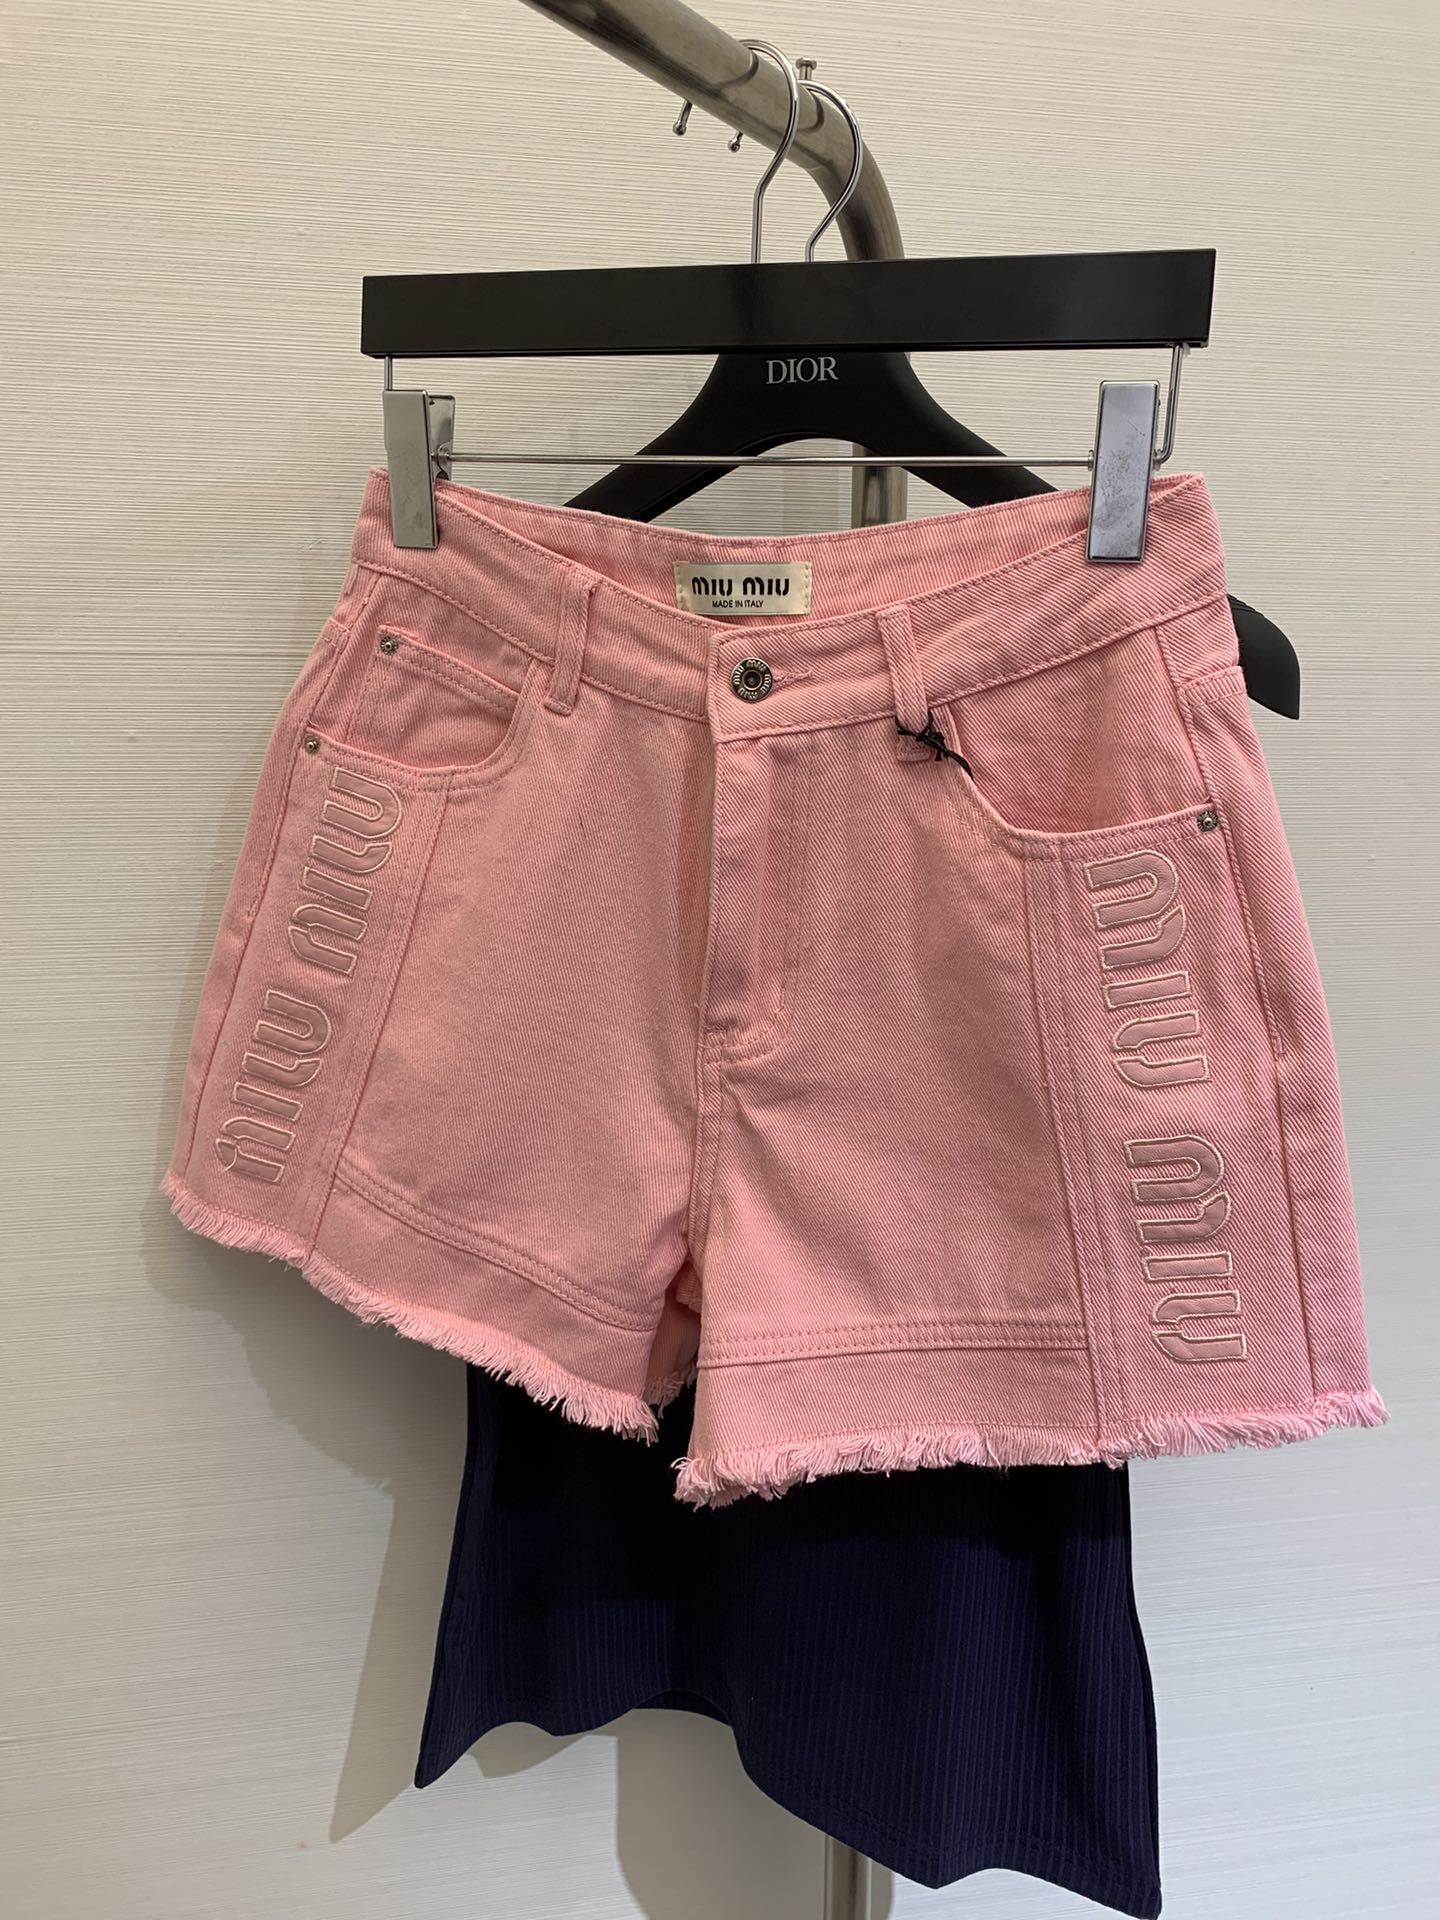 MiuMiu Store
 Clothing Jeans Shorts Pink Embroidery Summer Collection Fashion